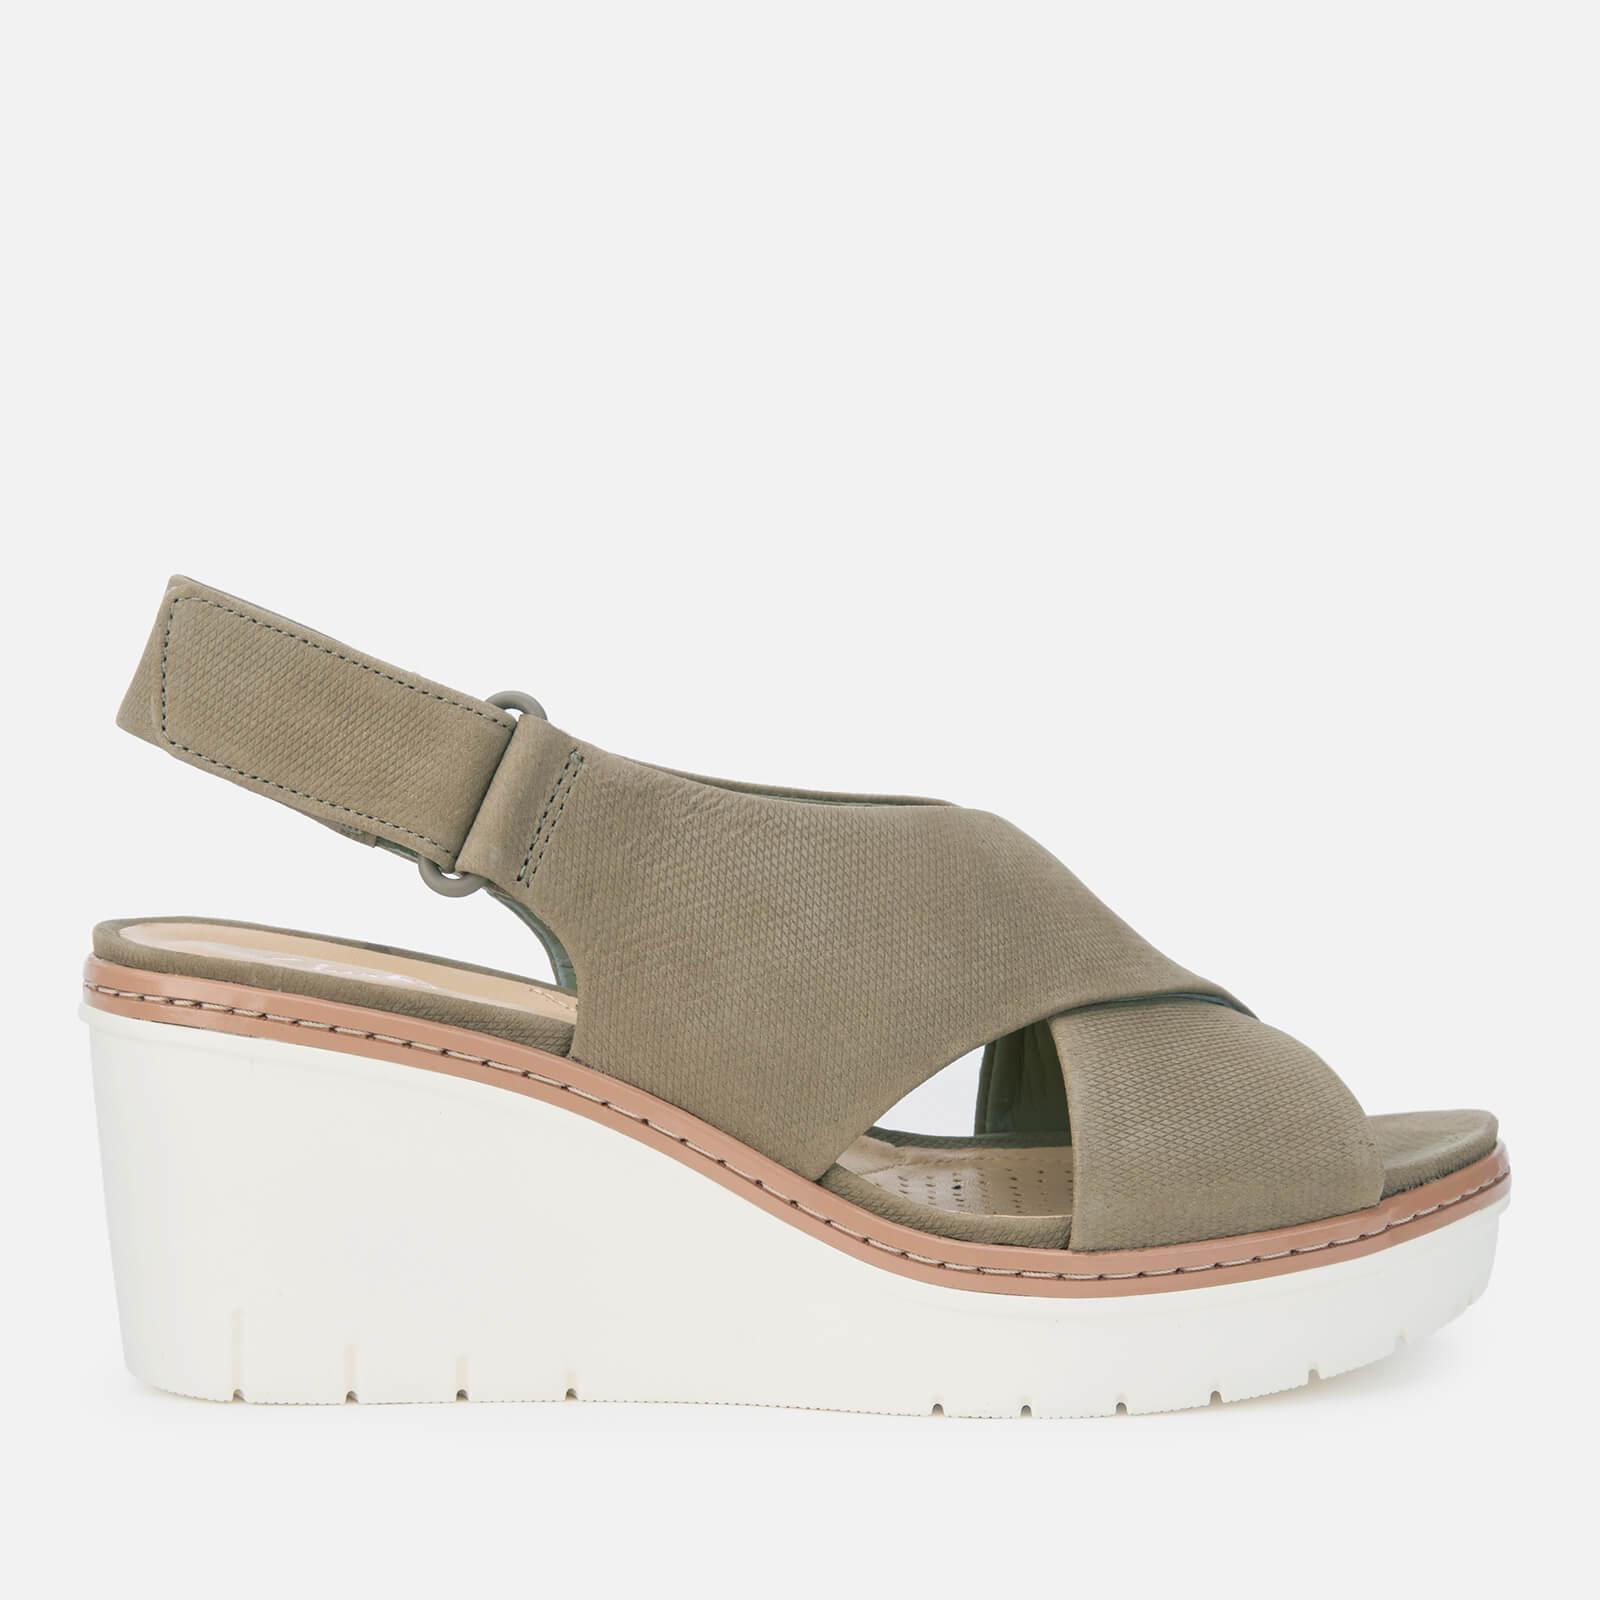 Clarks Palm Candid Nubuck Wedged Sandals in Green - Lyst